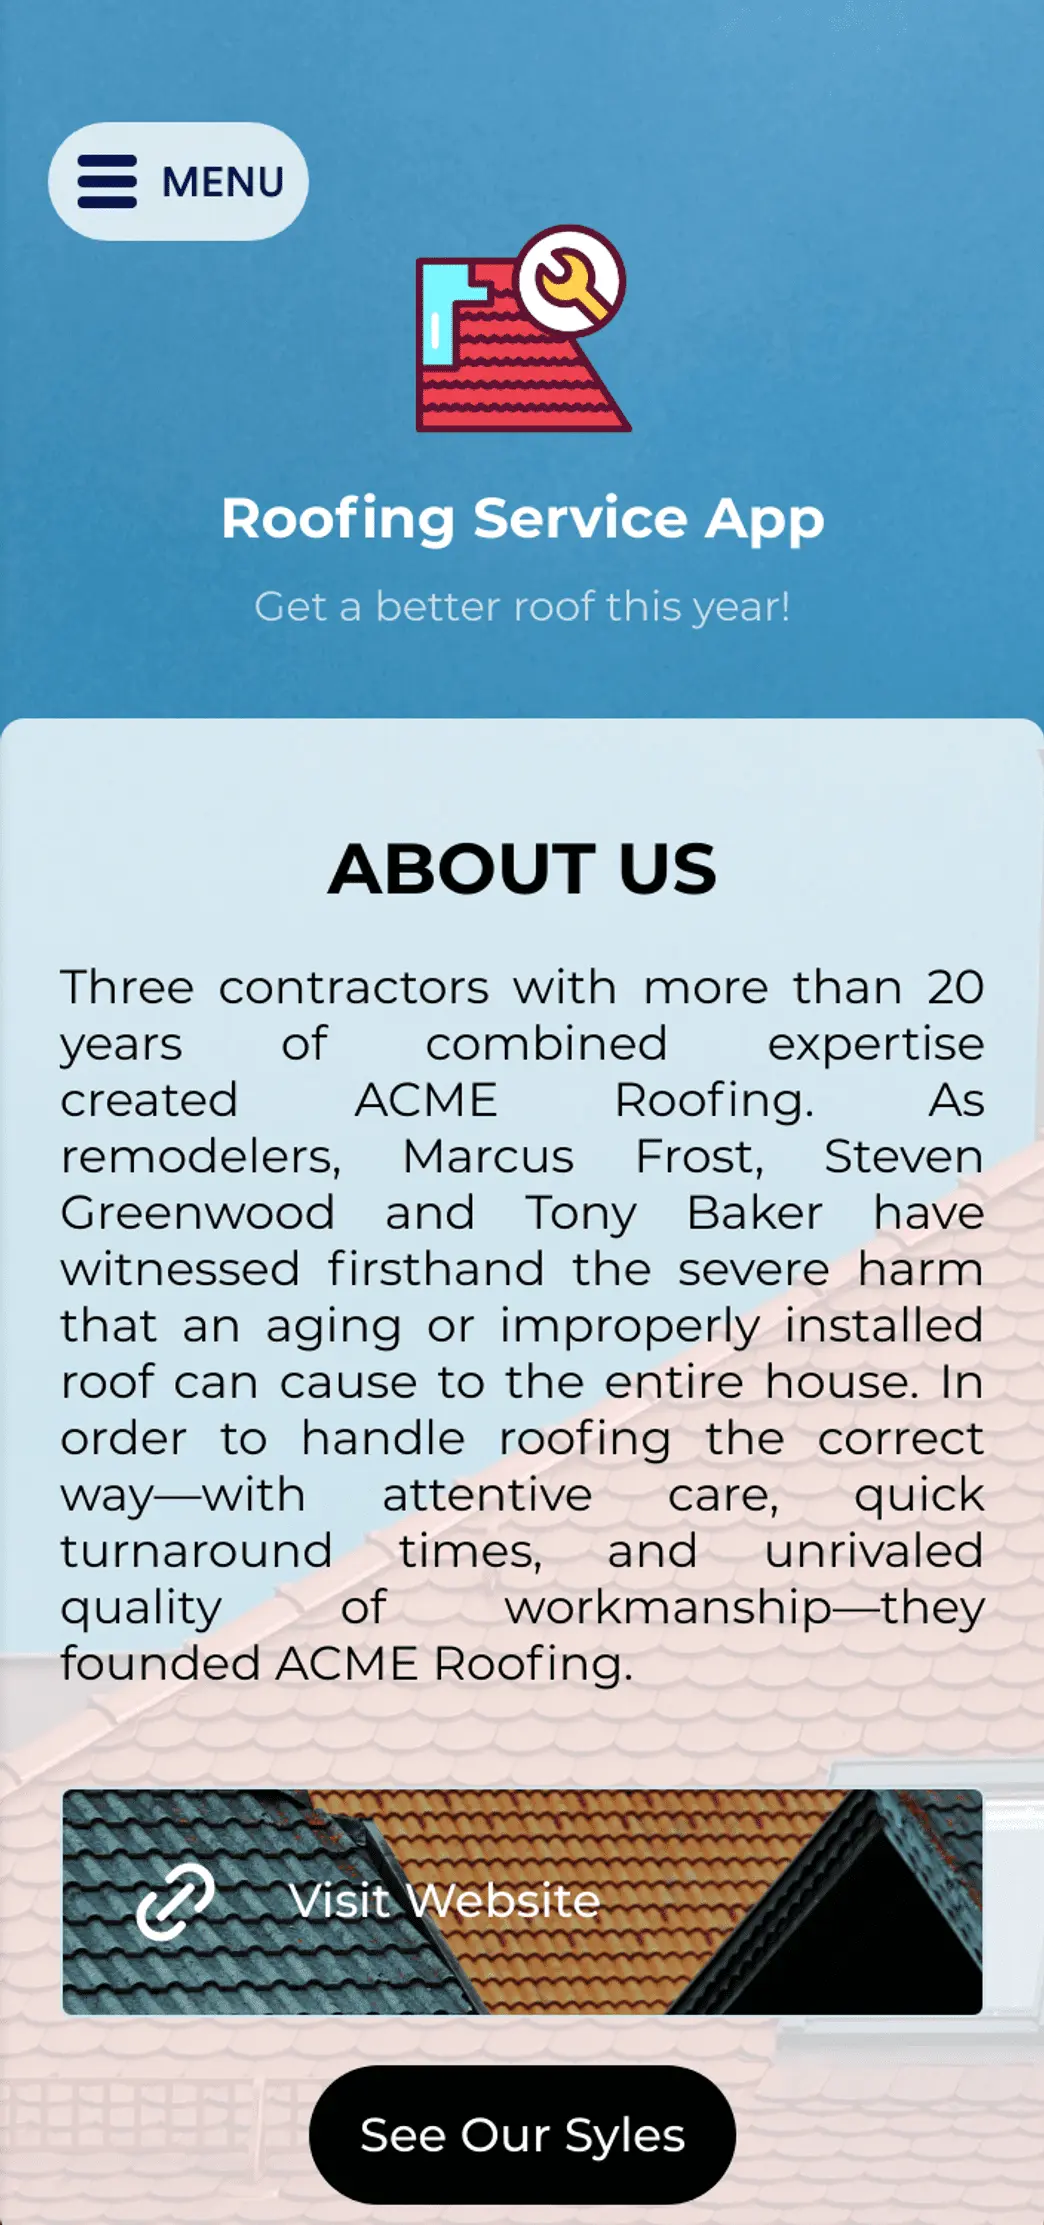 Roofing Service App